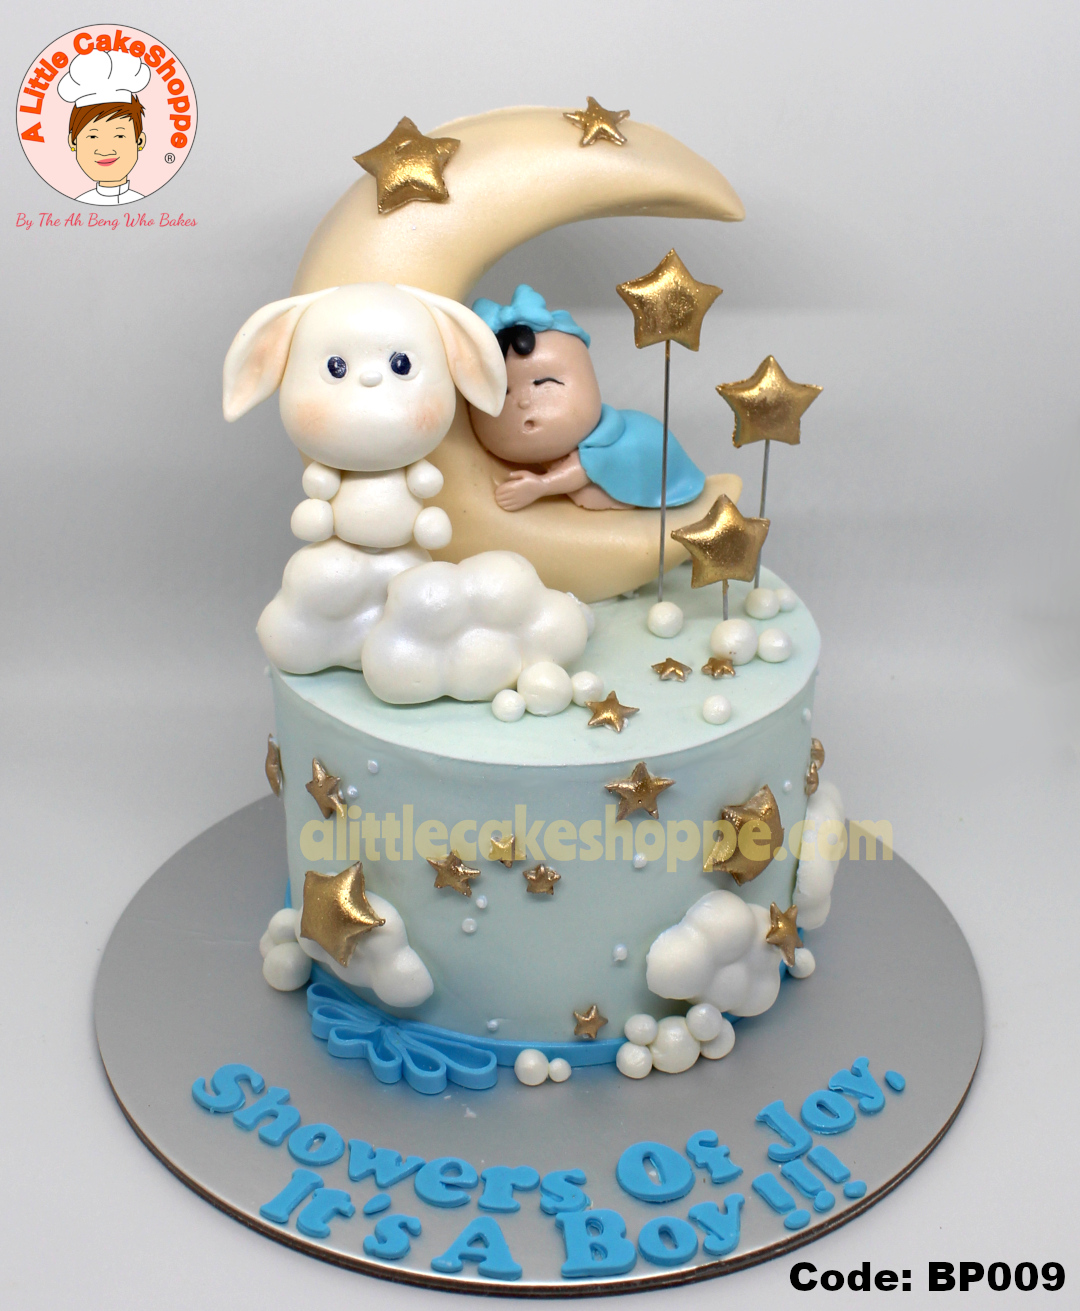 Best Cake Shop Singapore Delivery Best Customised Cake Shop Singapore customise cake custom cake 2D 3D birthday cake cupcakes desserts wedding corporate events anniversary 1st birthday 21st birthday fondant fresh cream buttercream cakes alittlecakeshoppe a little cake shoppe compliments review singapore bakers SG cake shop cakeshop ah beng who bakes sgbakes novelty cakes sgcakes licensed sfa nea cake delivery celebration cakes kids birthday cake surprise cake adult children parenting baby full month cake